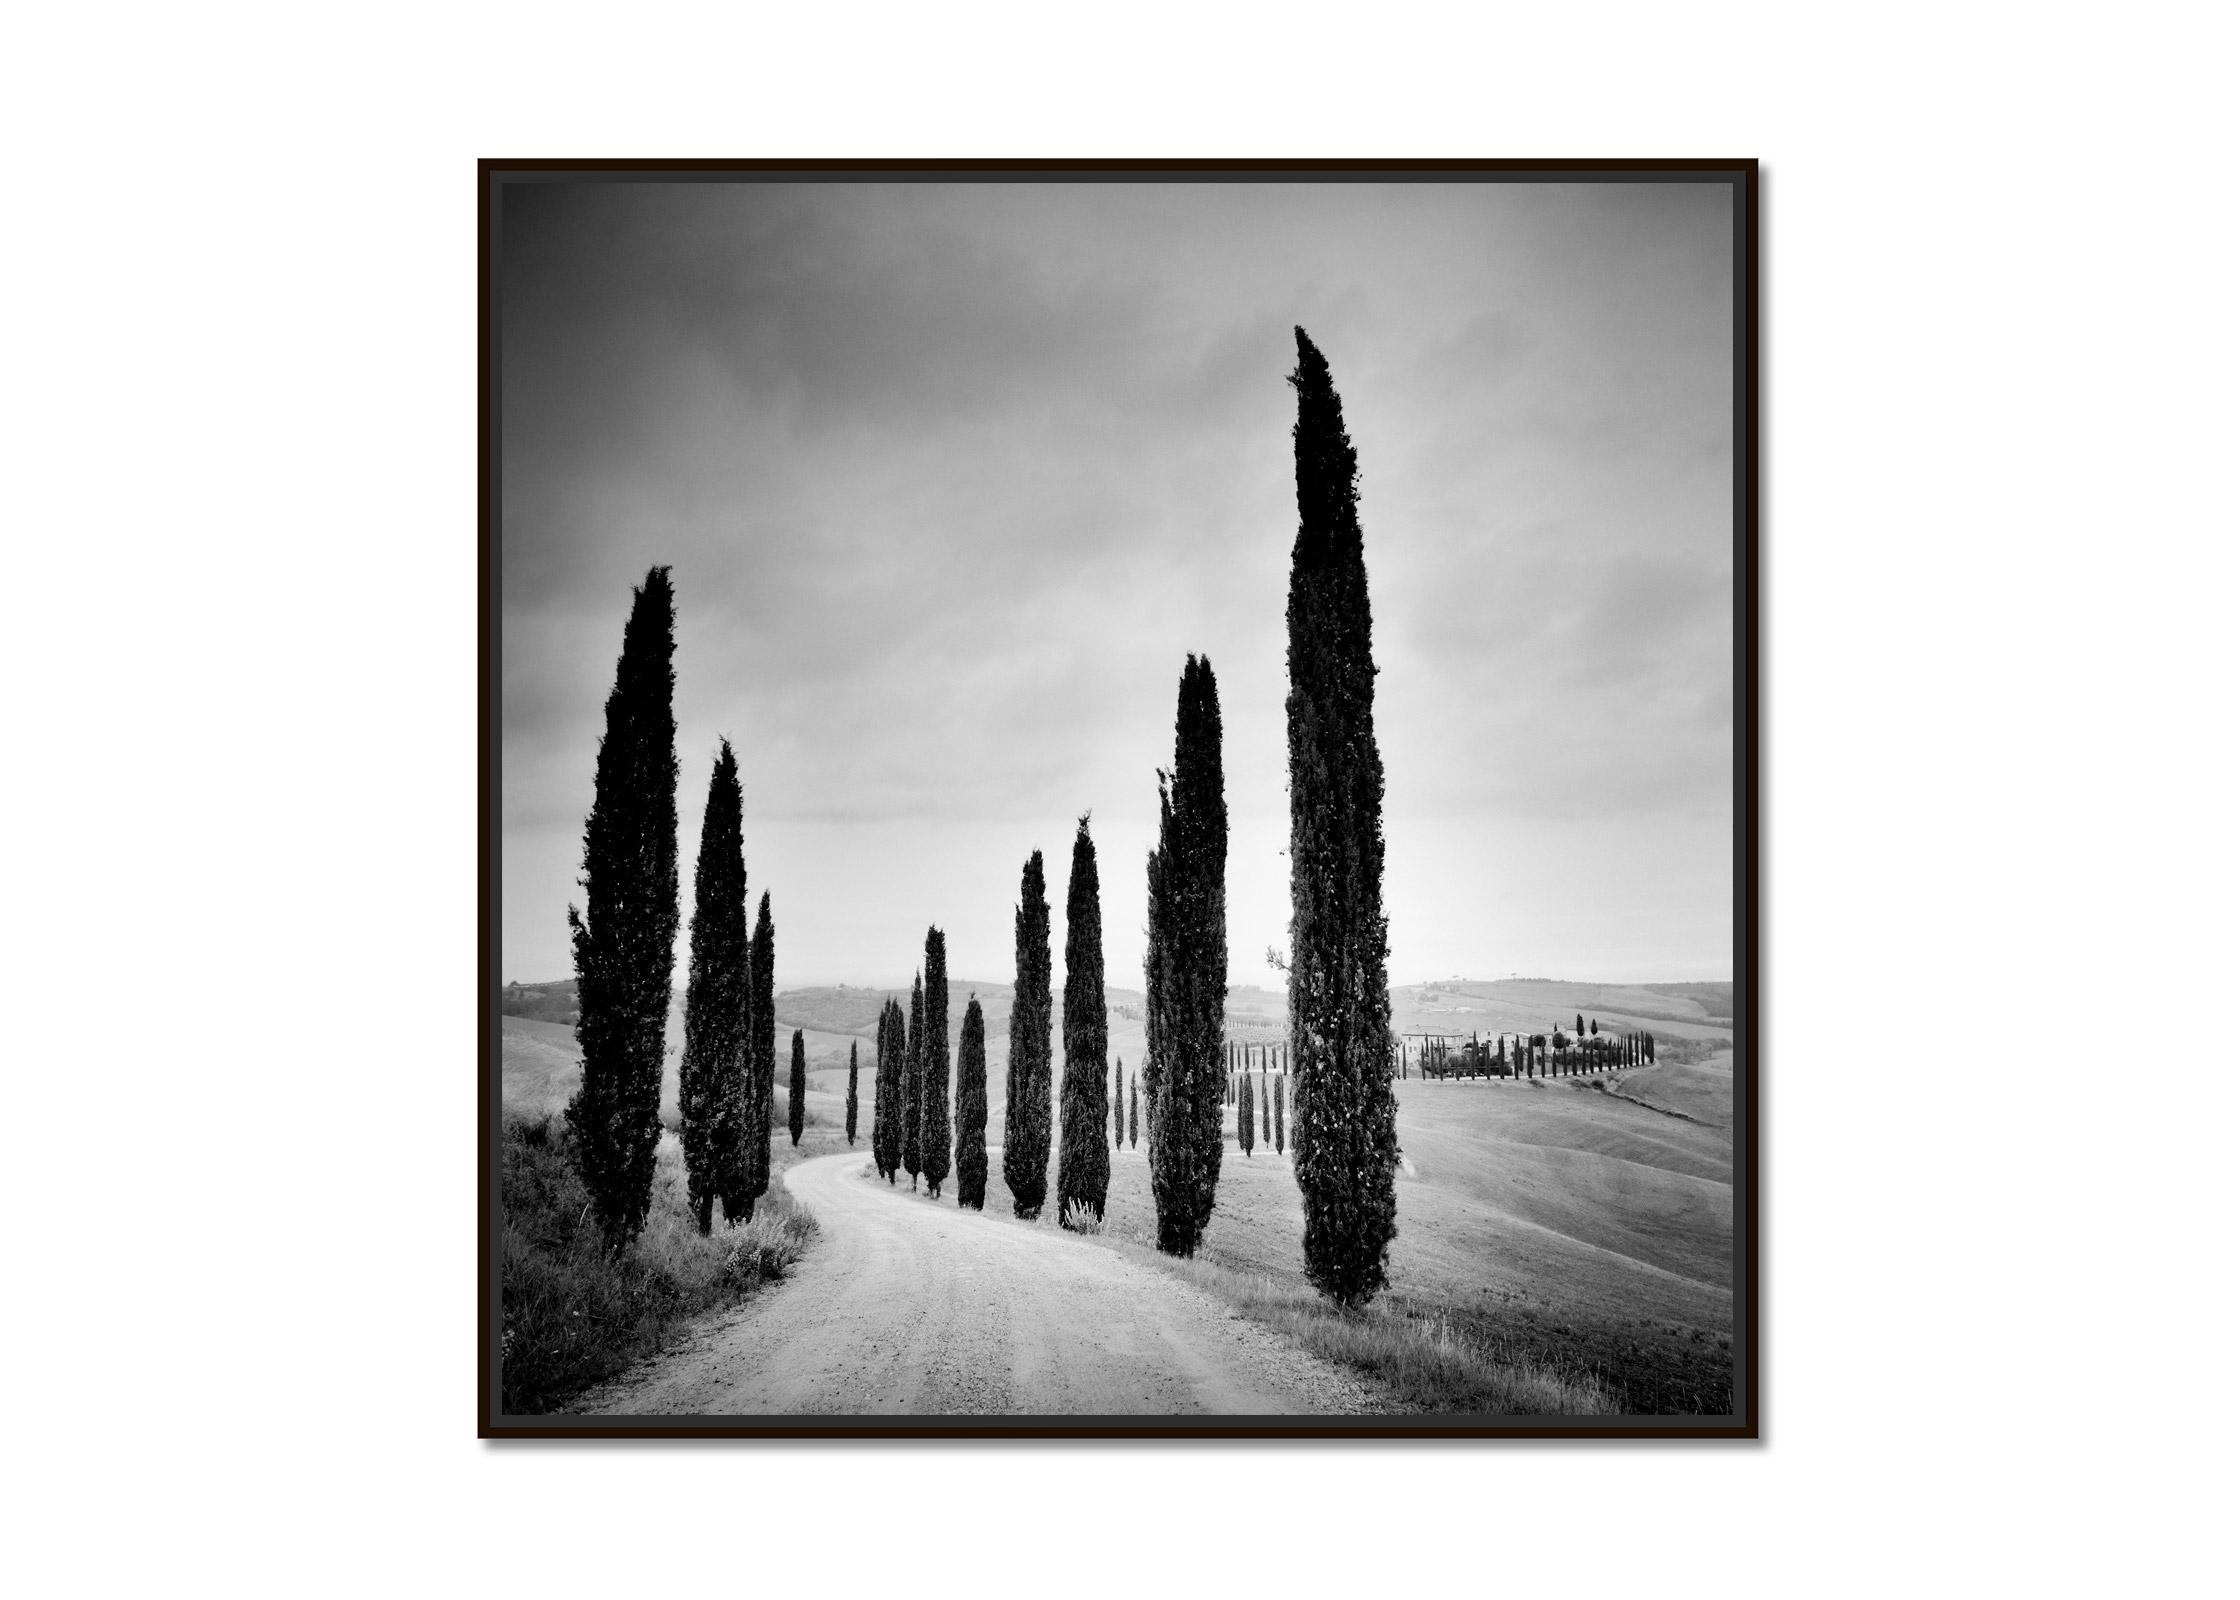 Cypress Trees along the Road, Tuscany, black and white photography, landscape - Photograph by Gerald Berghammer